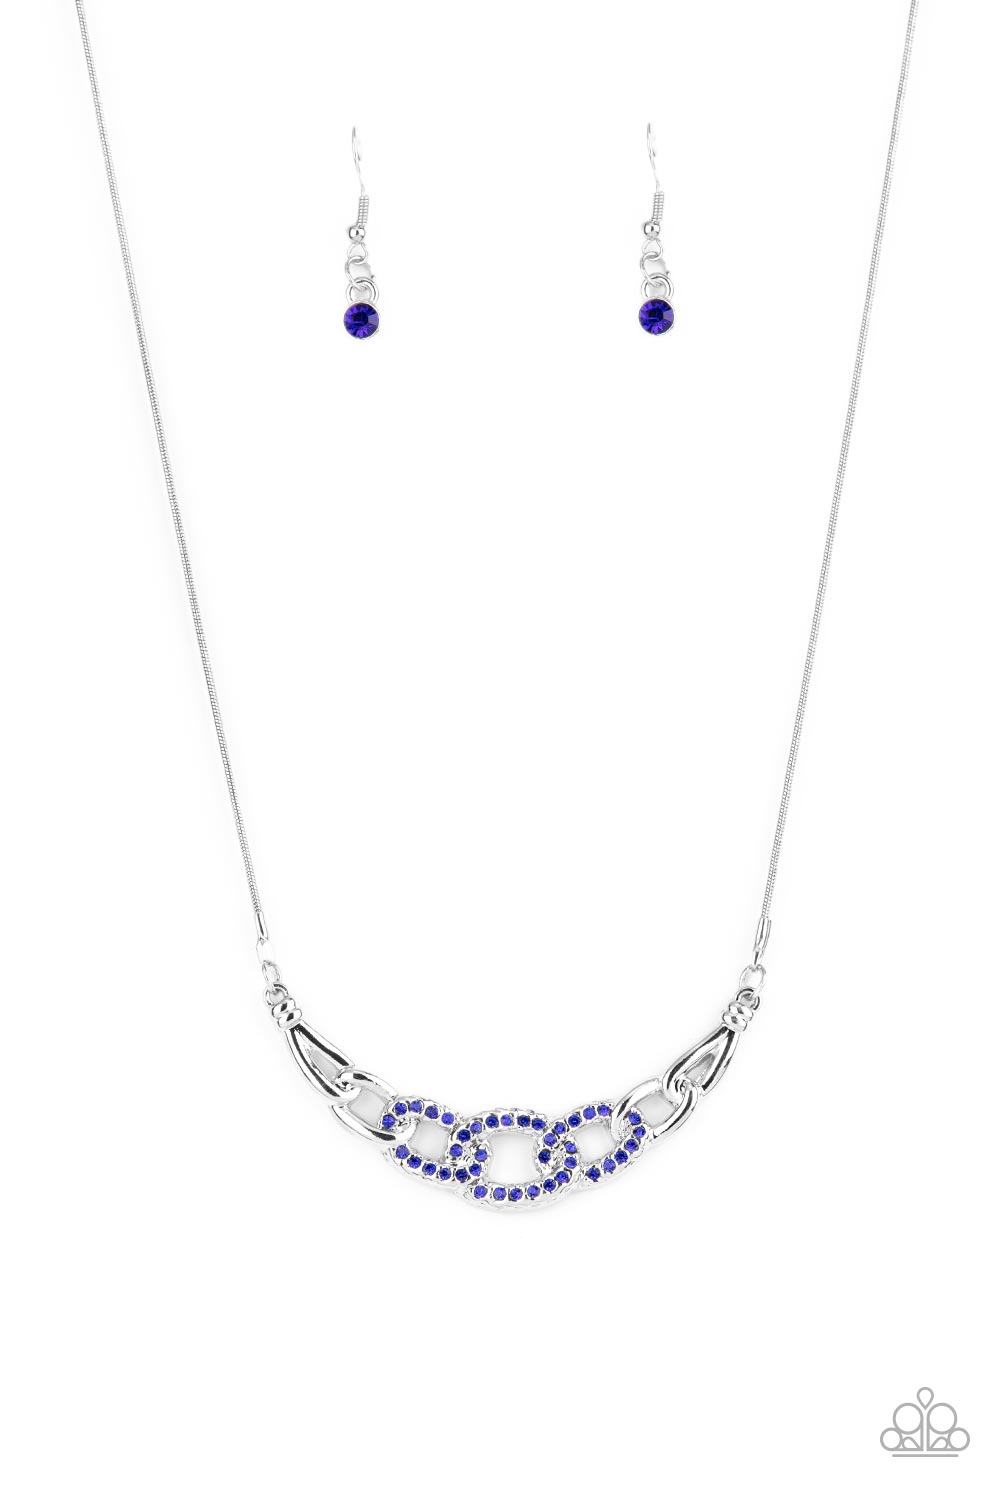 Paparazzi - KNOT In Love - Blue Necklace - Alies Bling Bar